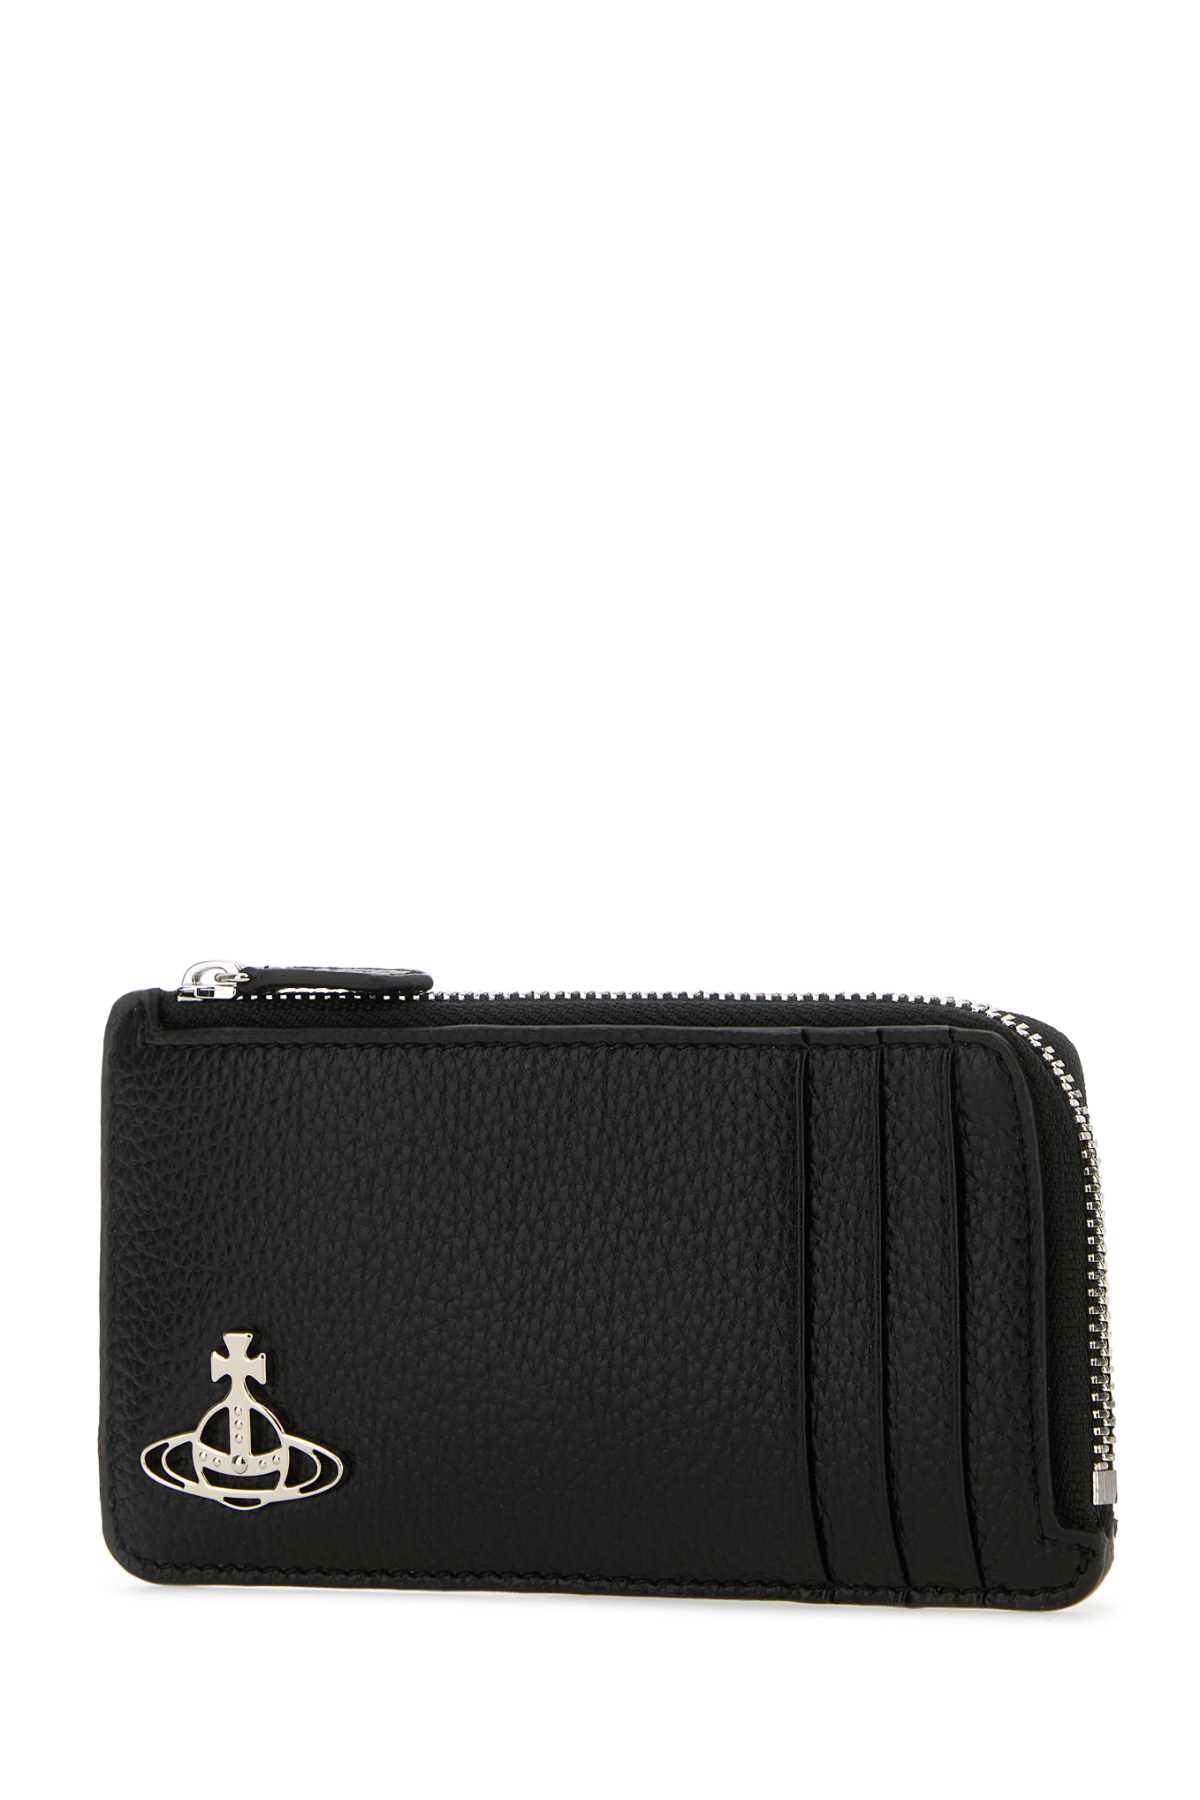 Vivienne Westwood Black Synthetic Leather Card Holder